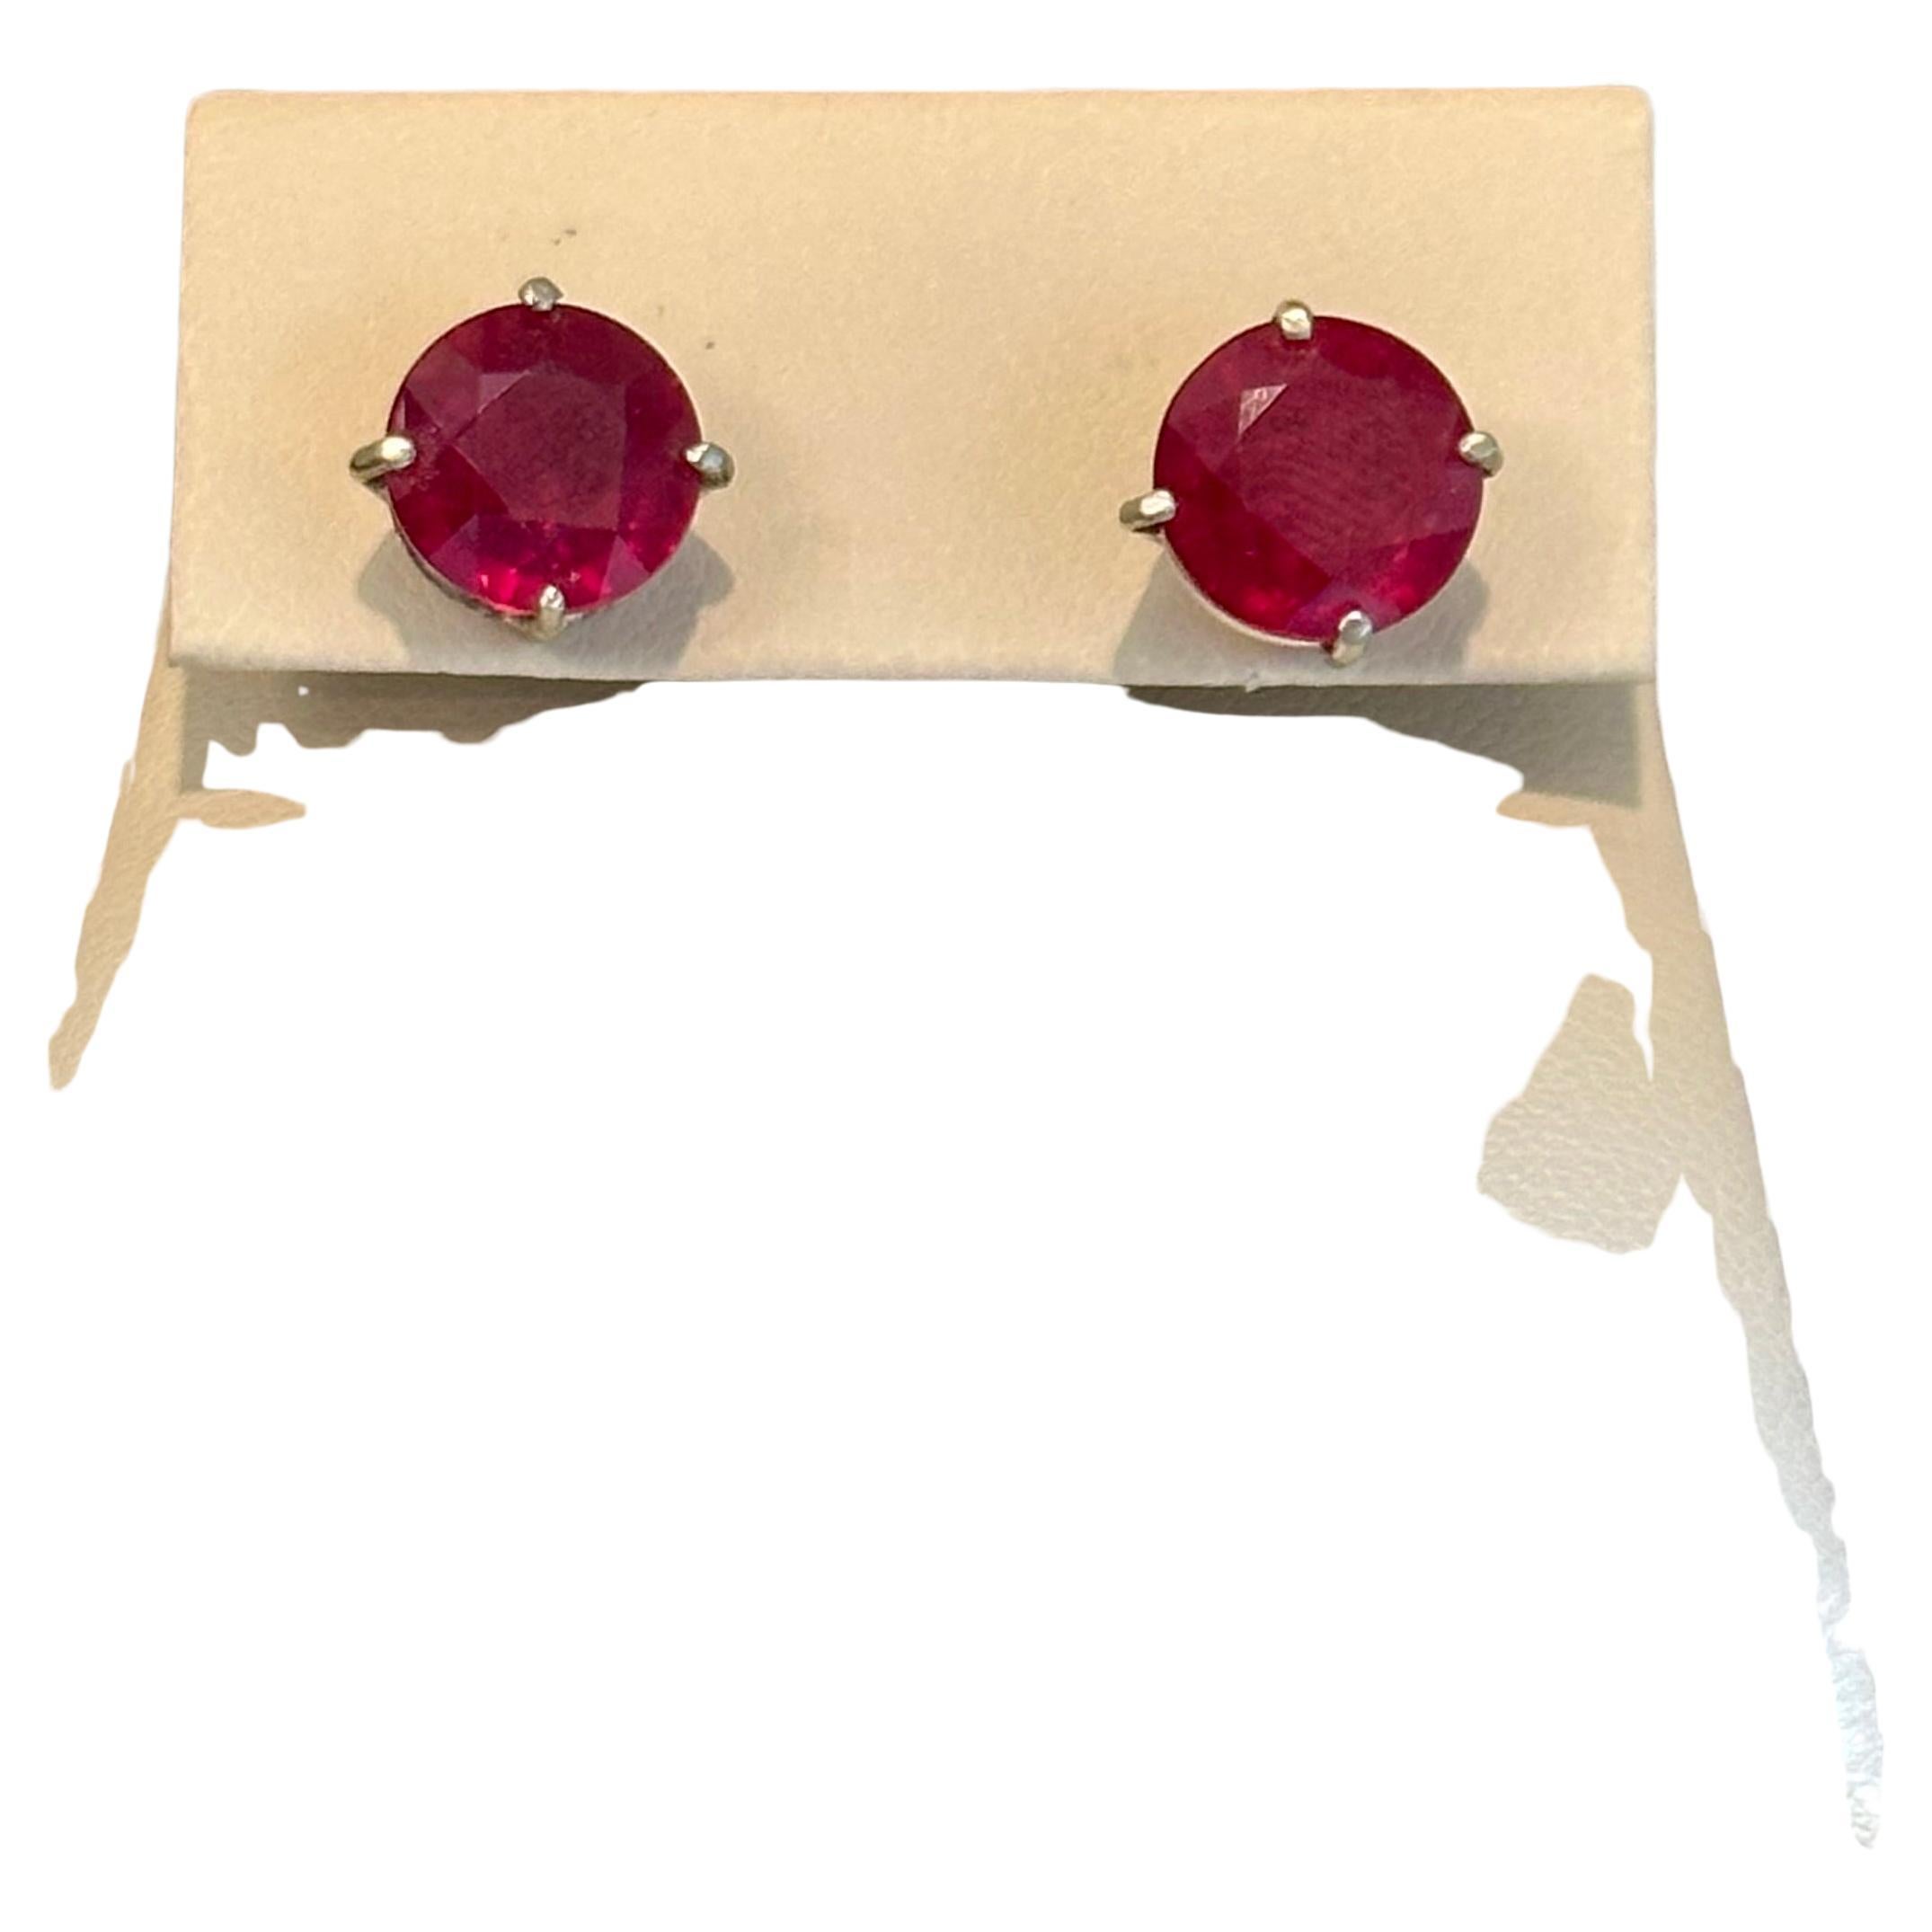 Special Price , Special offer
selling them at my cost !!

A sweet, shimmery style for any day of the week. These stud earrings 3 carat  each Solitaire round Treated Ruby
Set in 14 kt White gold. Post, Screw back Ruby stud earrings.
Best For Every